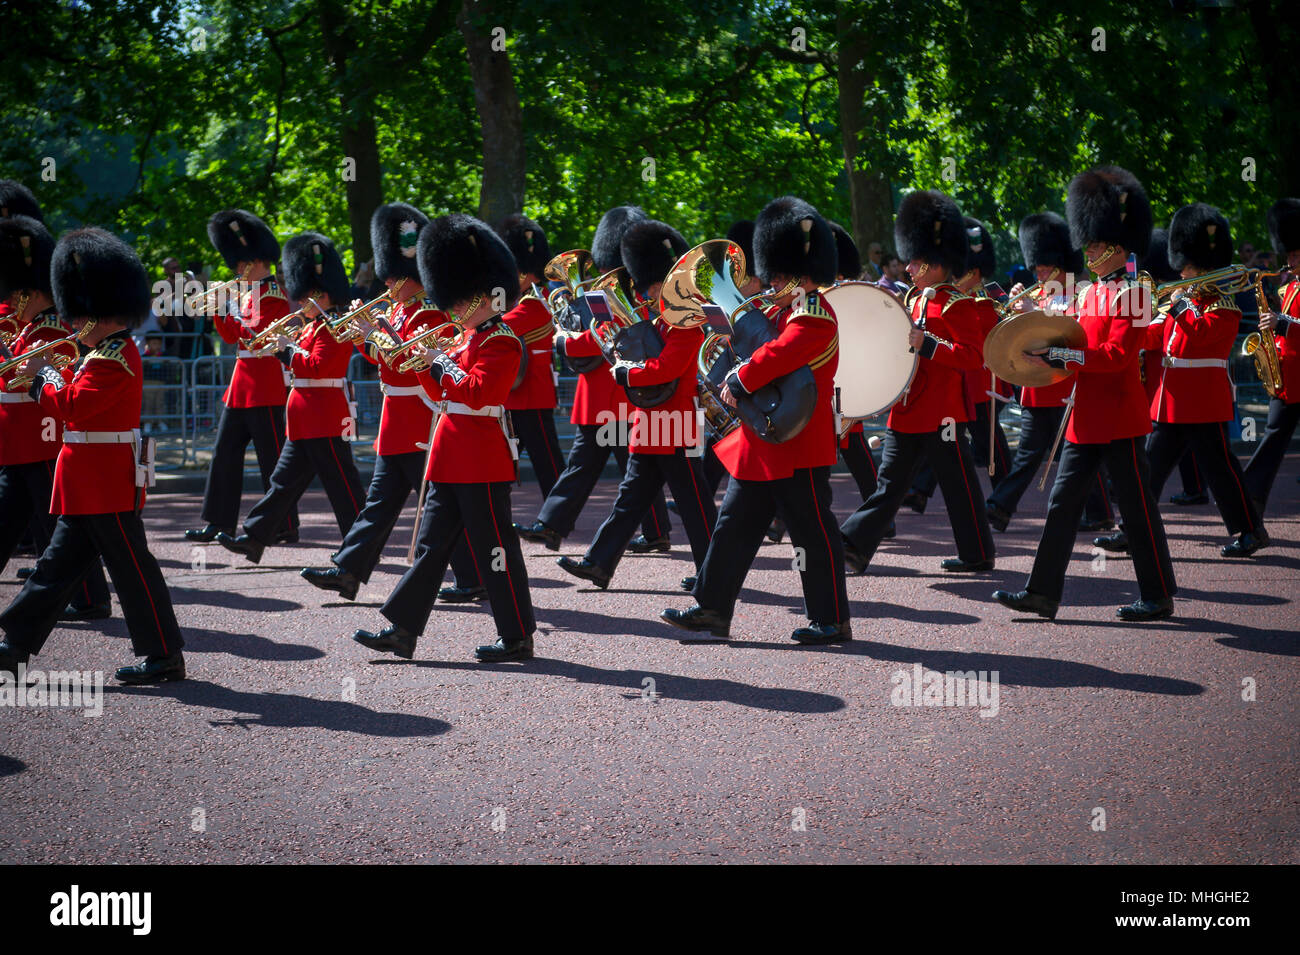 LONDON - JUNE 17, 2017: Military band marches in formation down The Mall in a royal Trooping the Colour ceremony in honour of the Queen's Birthday. Stock Photo